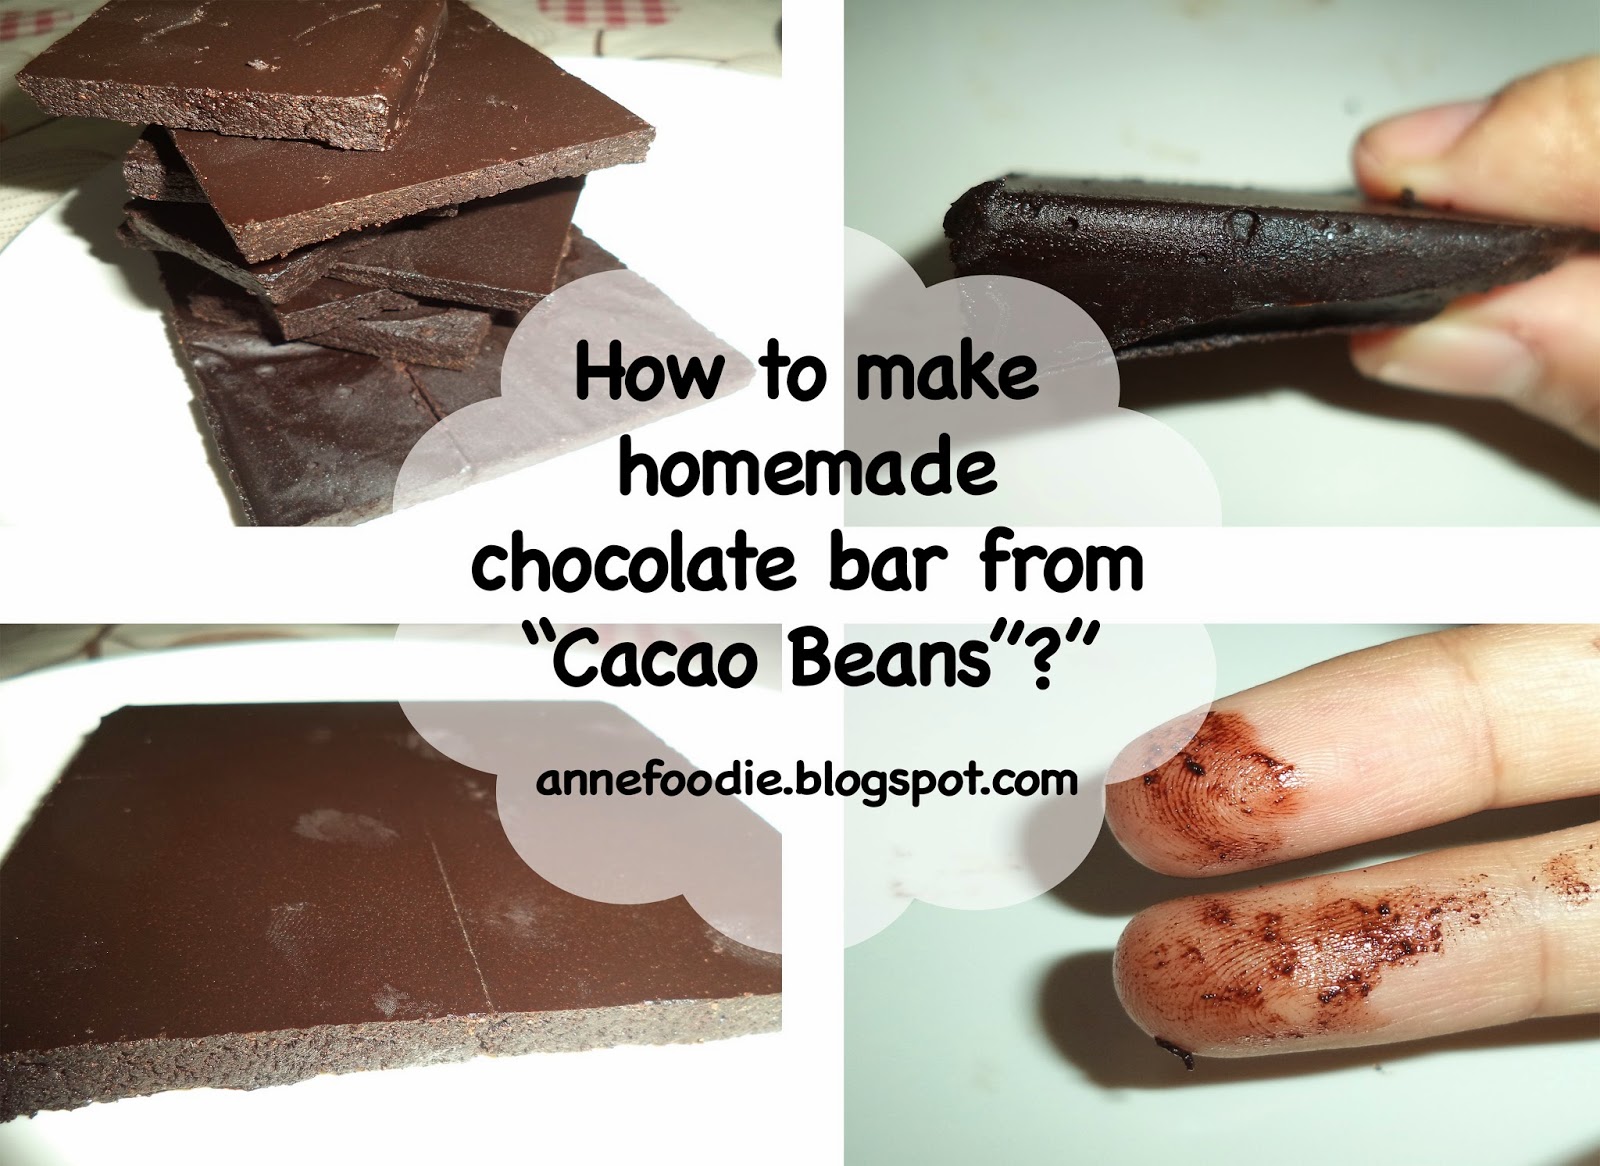 This is how I make my own version of chocolate bar from Cacao beans. In this post I shared how to make homemade chocolate from your own kitchen and using the equipment that already have at home like blender to pulverize my cacao beans. I posted the procedure to be easily follow for beginner like me. This recipe also contains only 3 ingredients to make pure chocolate and this recipe can be customized if you want to add other flavors like salt, cashew nuts or milk.